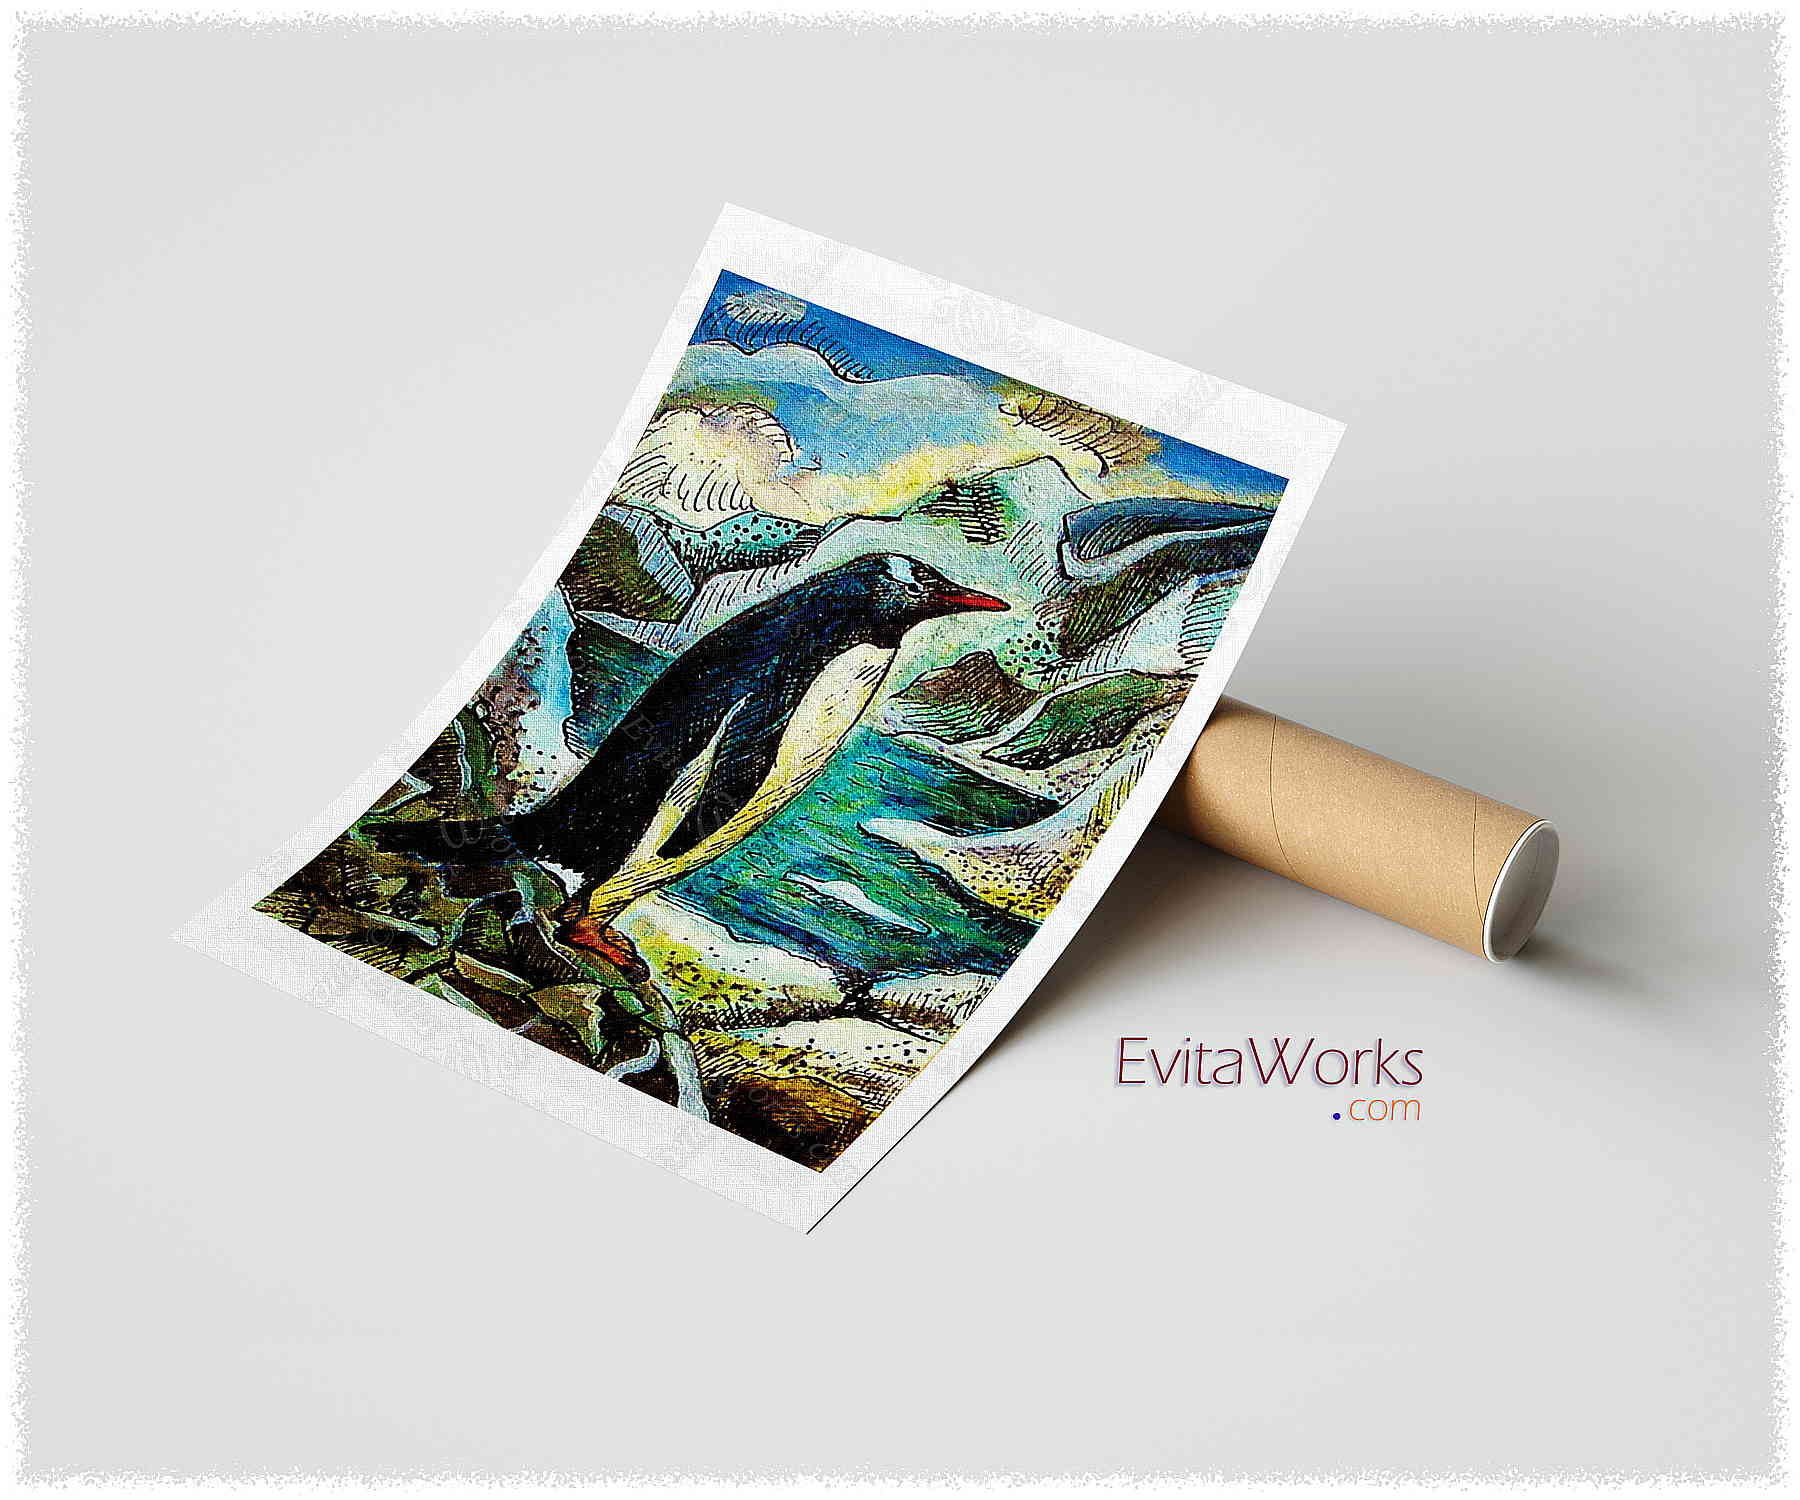 Hit to learn about "Bird in nature illustration 03" on prints